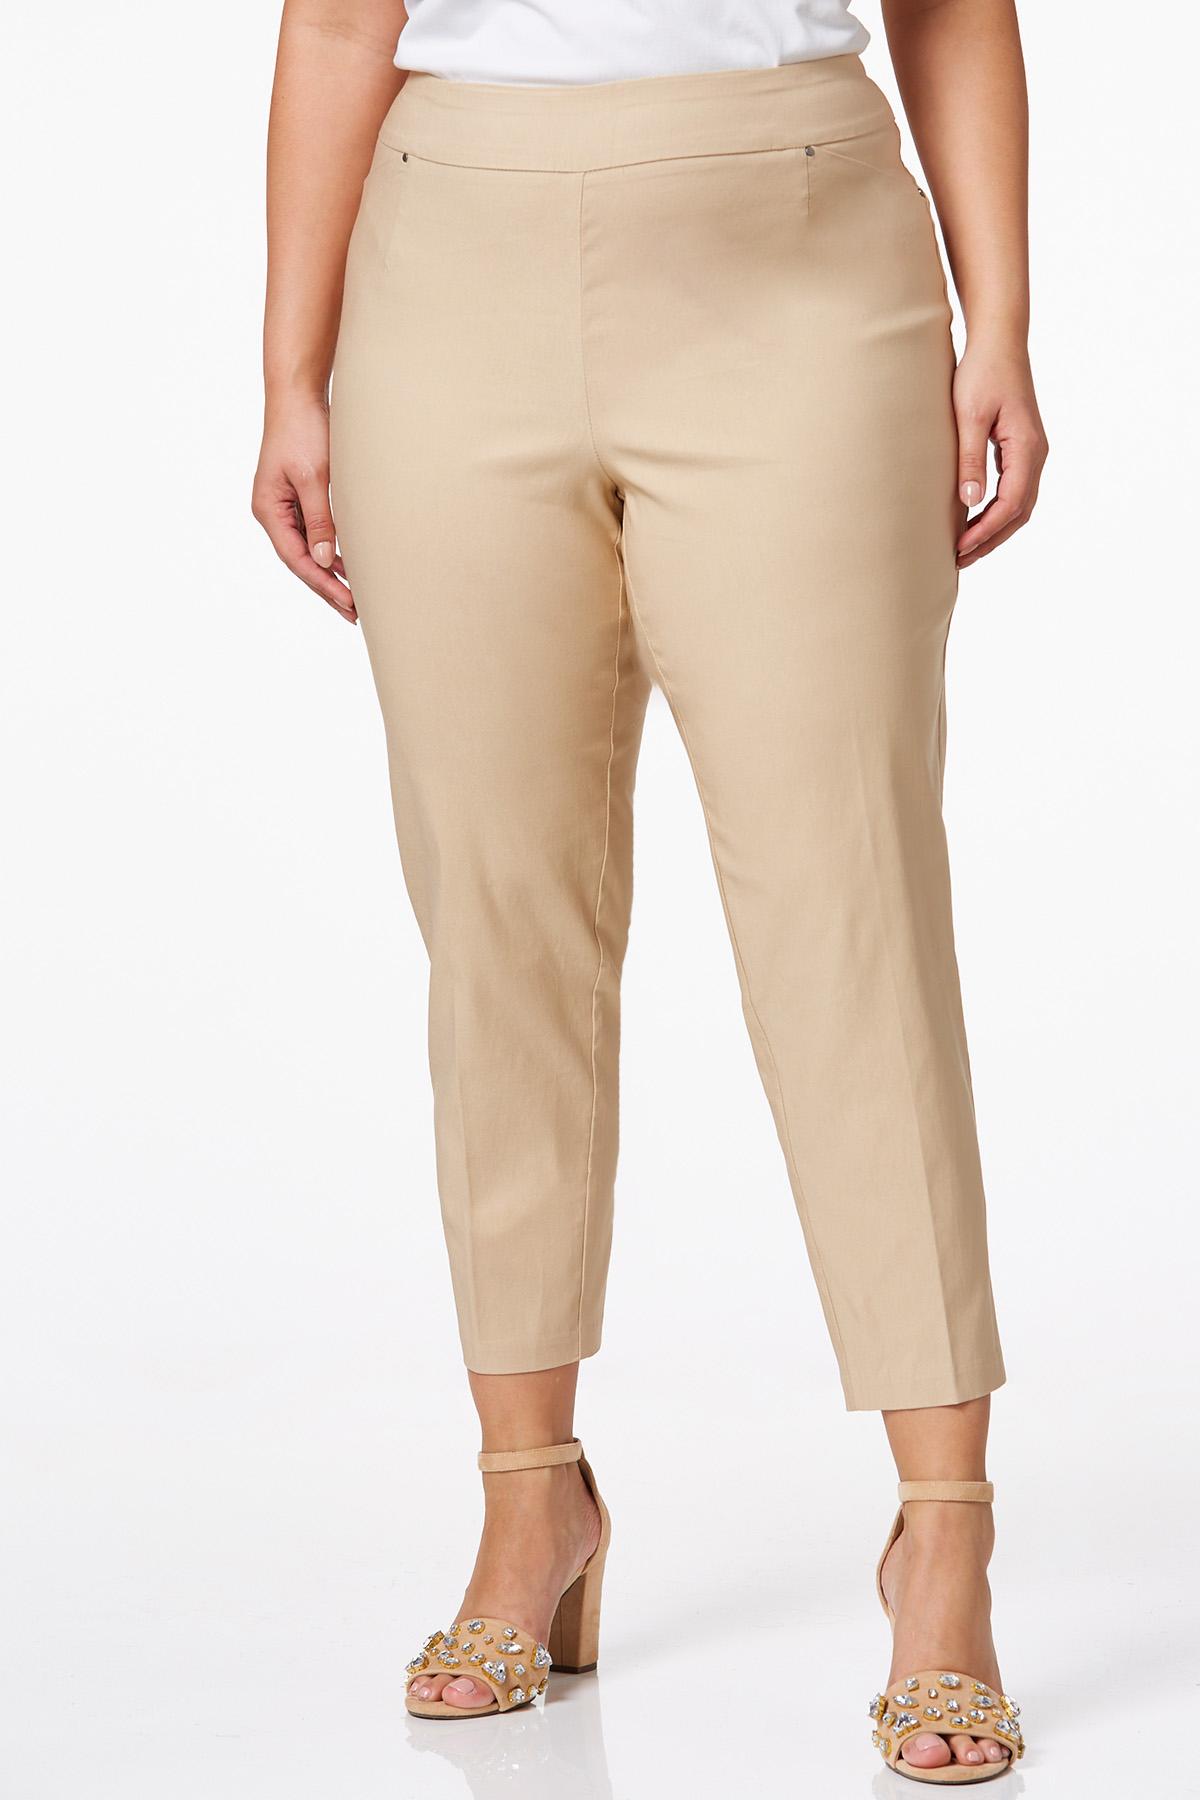 Cato Fashions  Cato Plus Size Bengaline Pull-On Pants